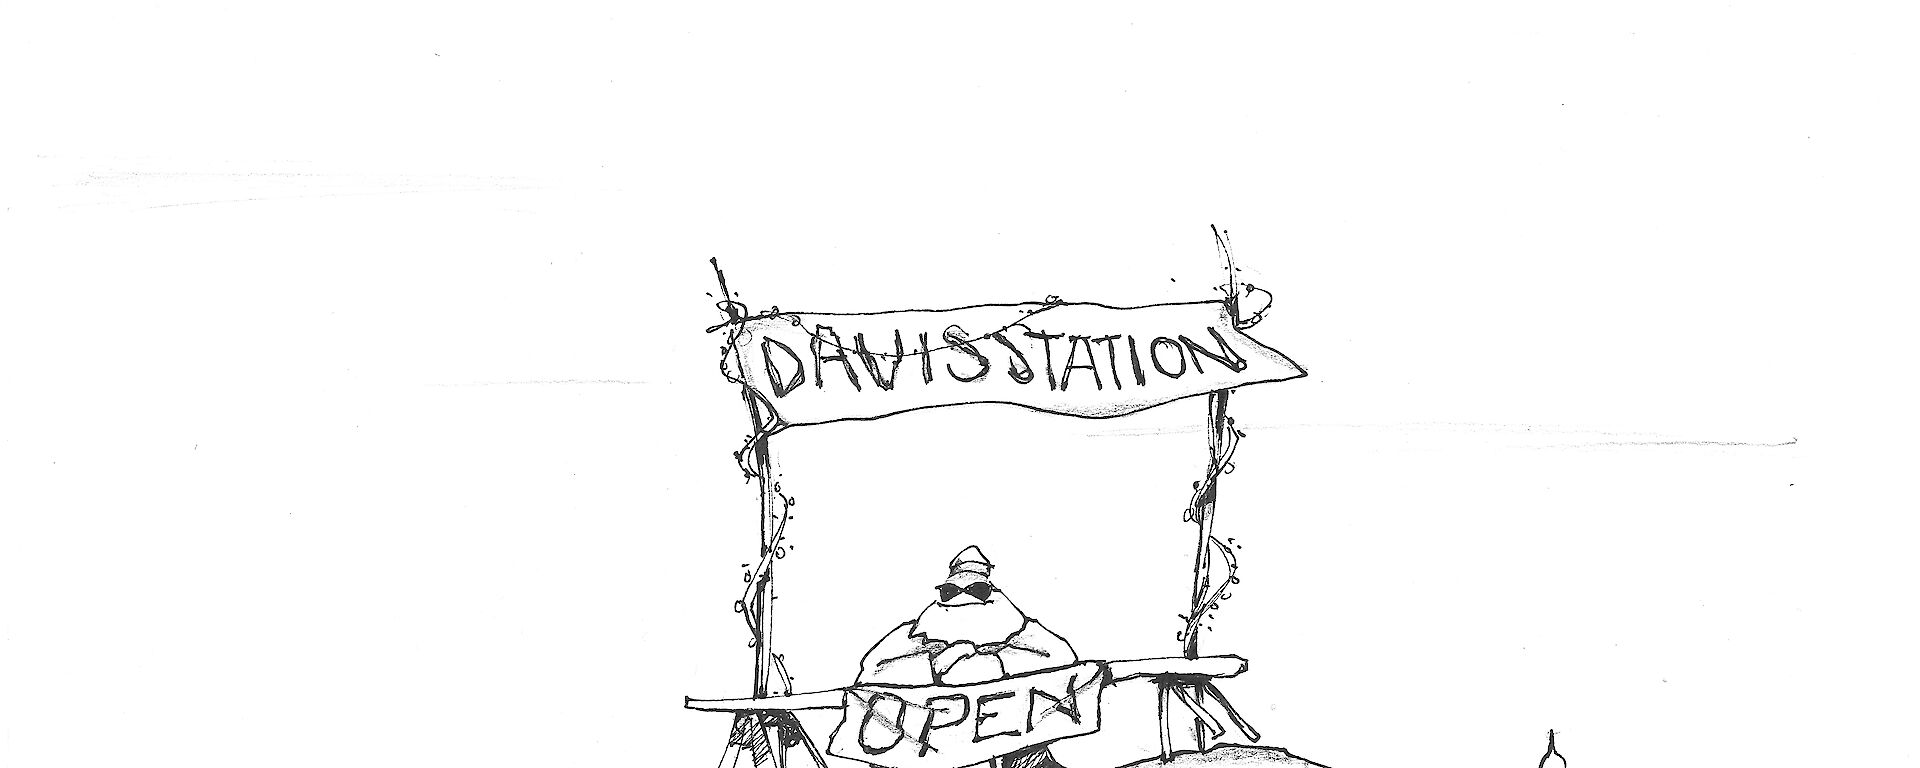 Cartoon illustration promoting the station is open for business with a ship in the background